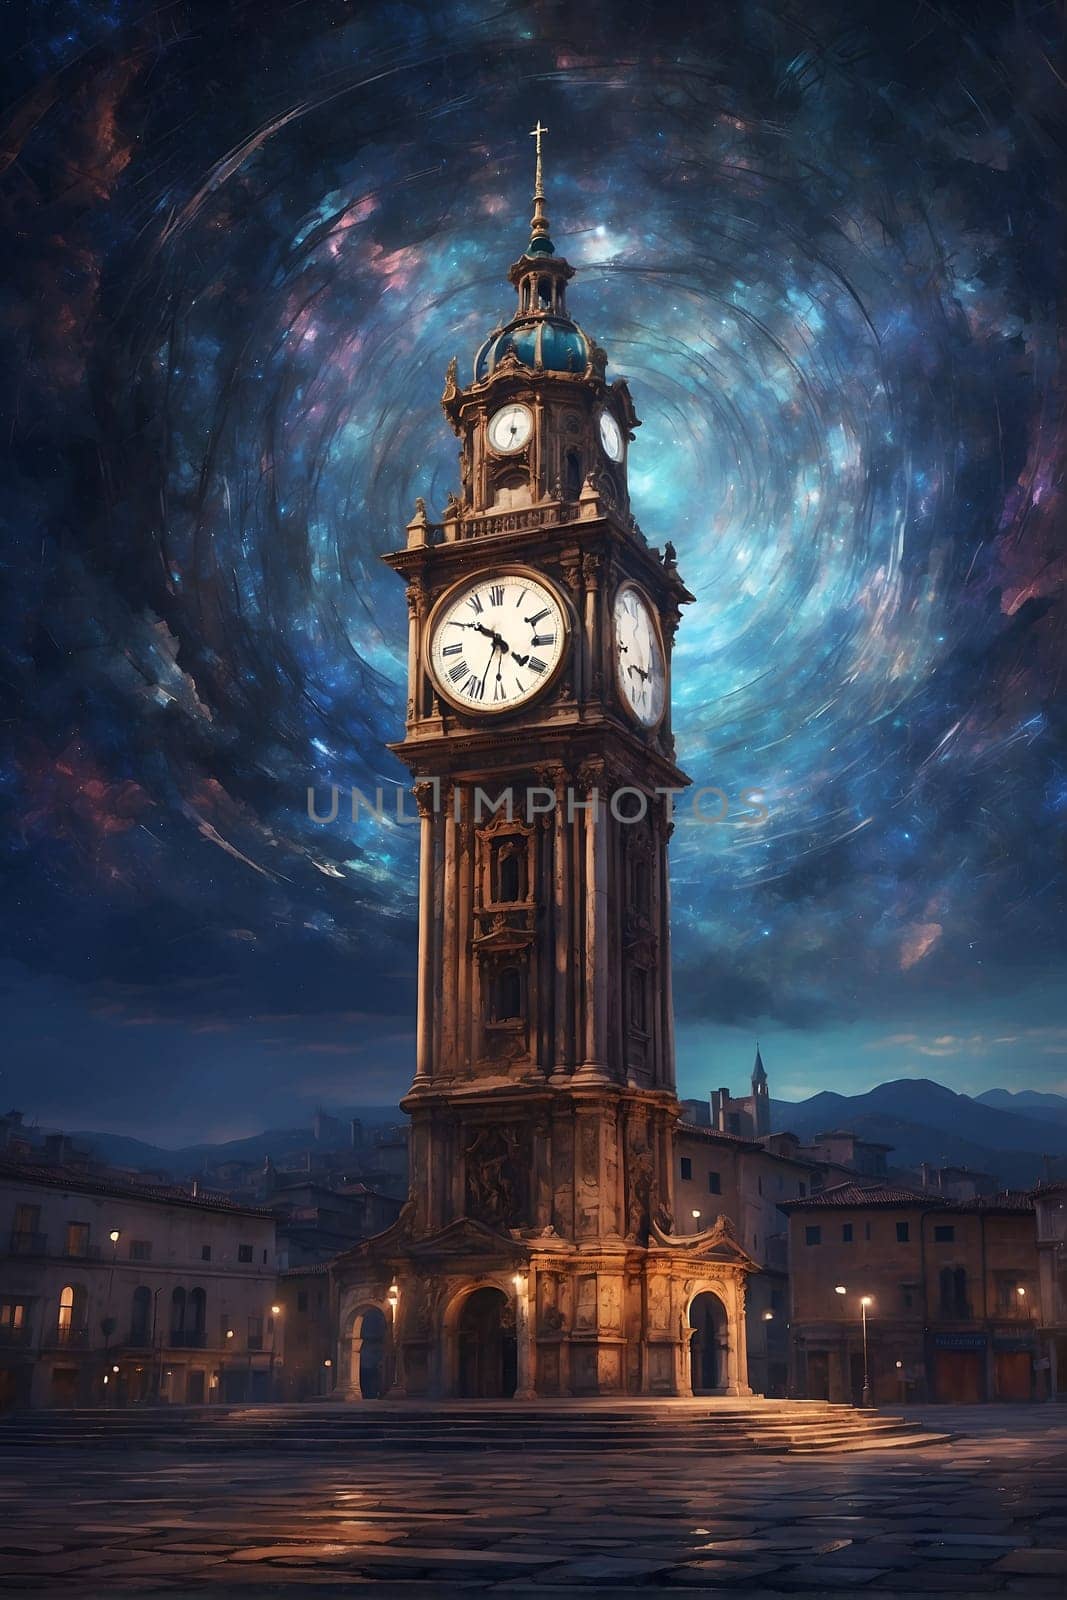 A stunning depiction of a towns central clock tower, capturing its architectural beauty and historical significance.